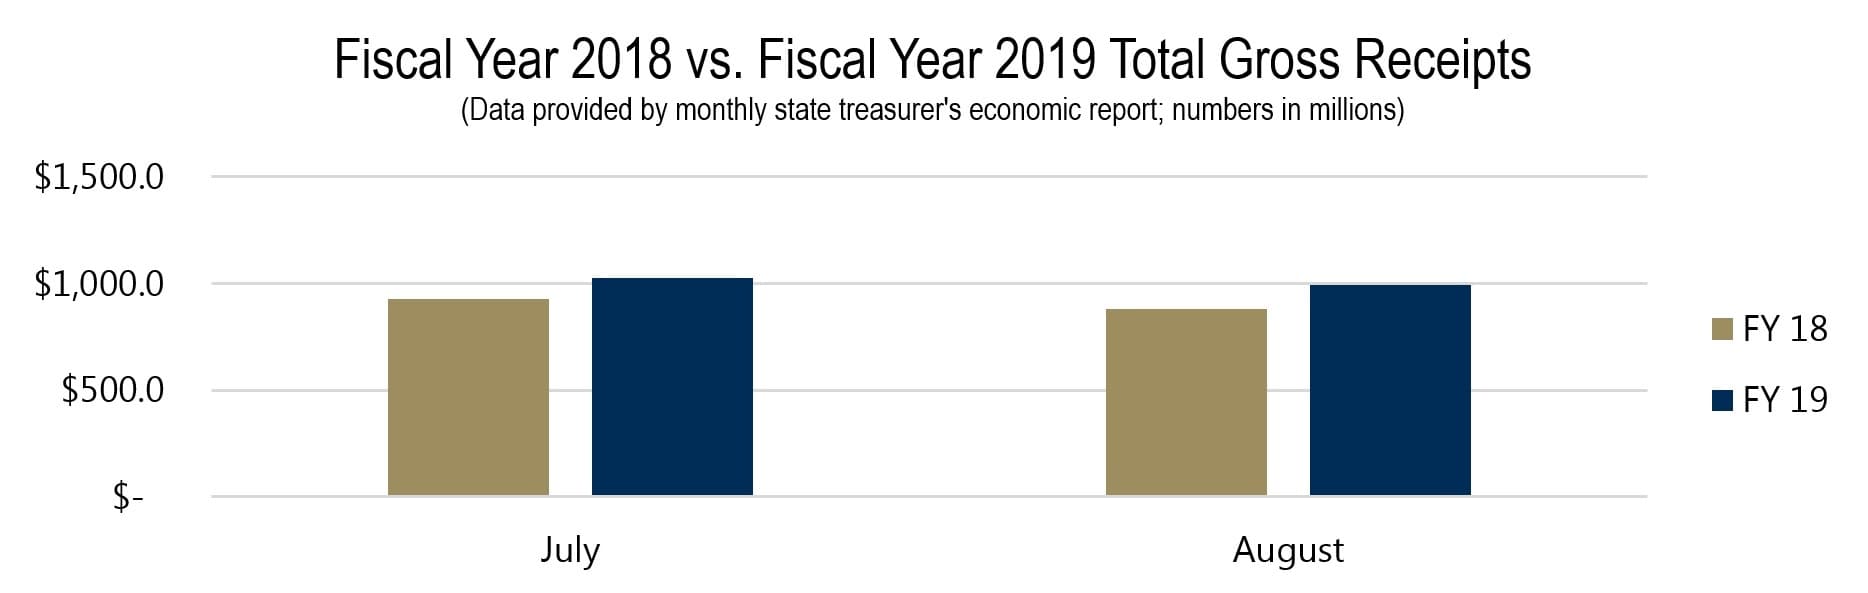 Fiscal Year 2018 vs Fiscal Year 2019 Total Gross Receipts